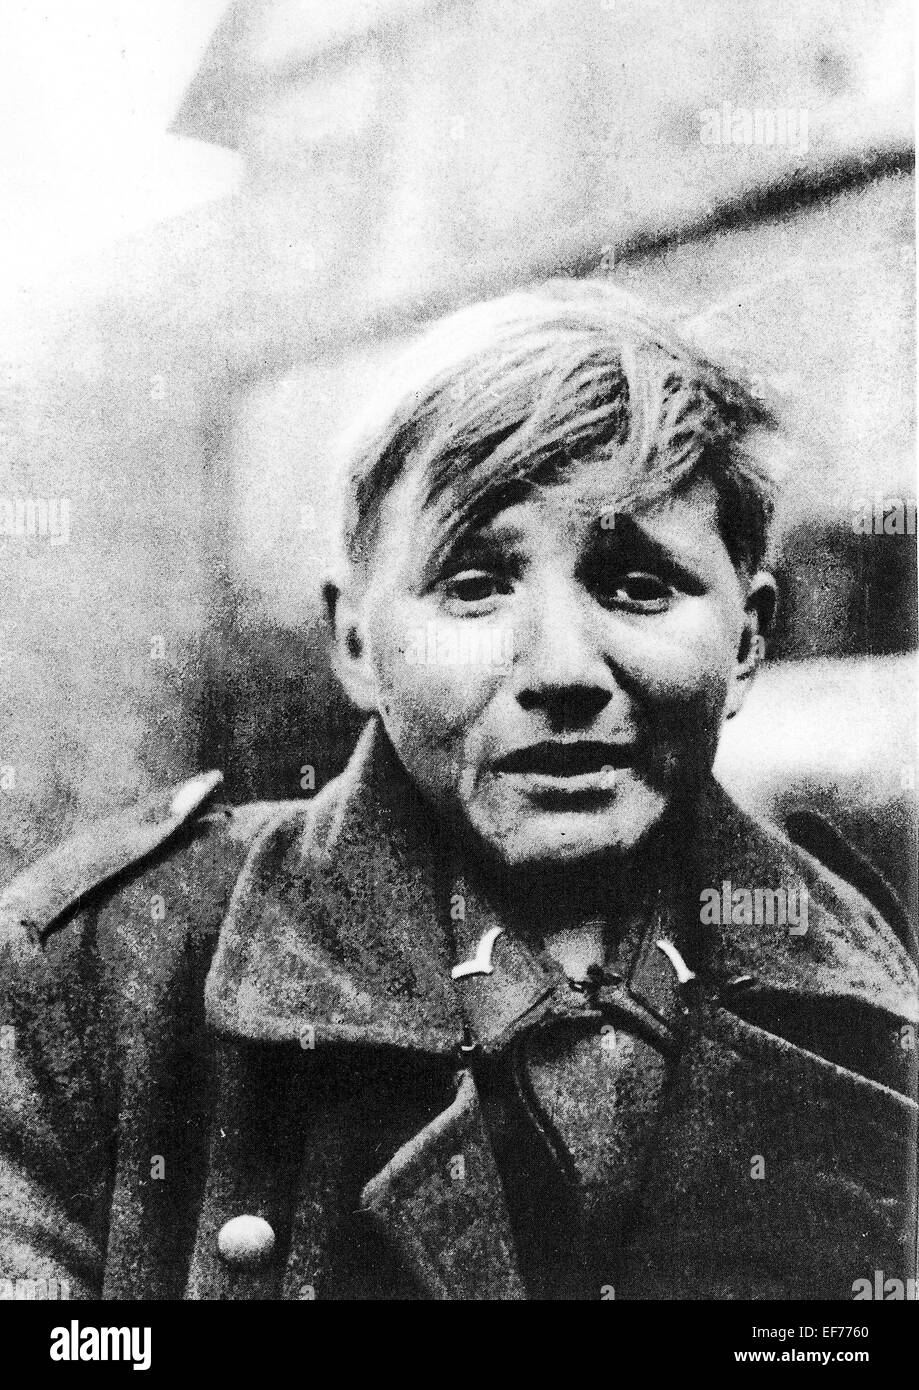 Young German Soldier, 1944 - Soldier of German Luftwaffe Hans-Georg Henke as prisoner of war at the end of World War II, photographed by an American war correspondent. Stock Photo